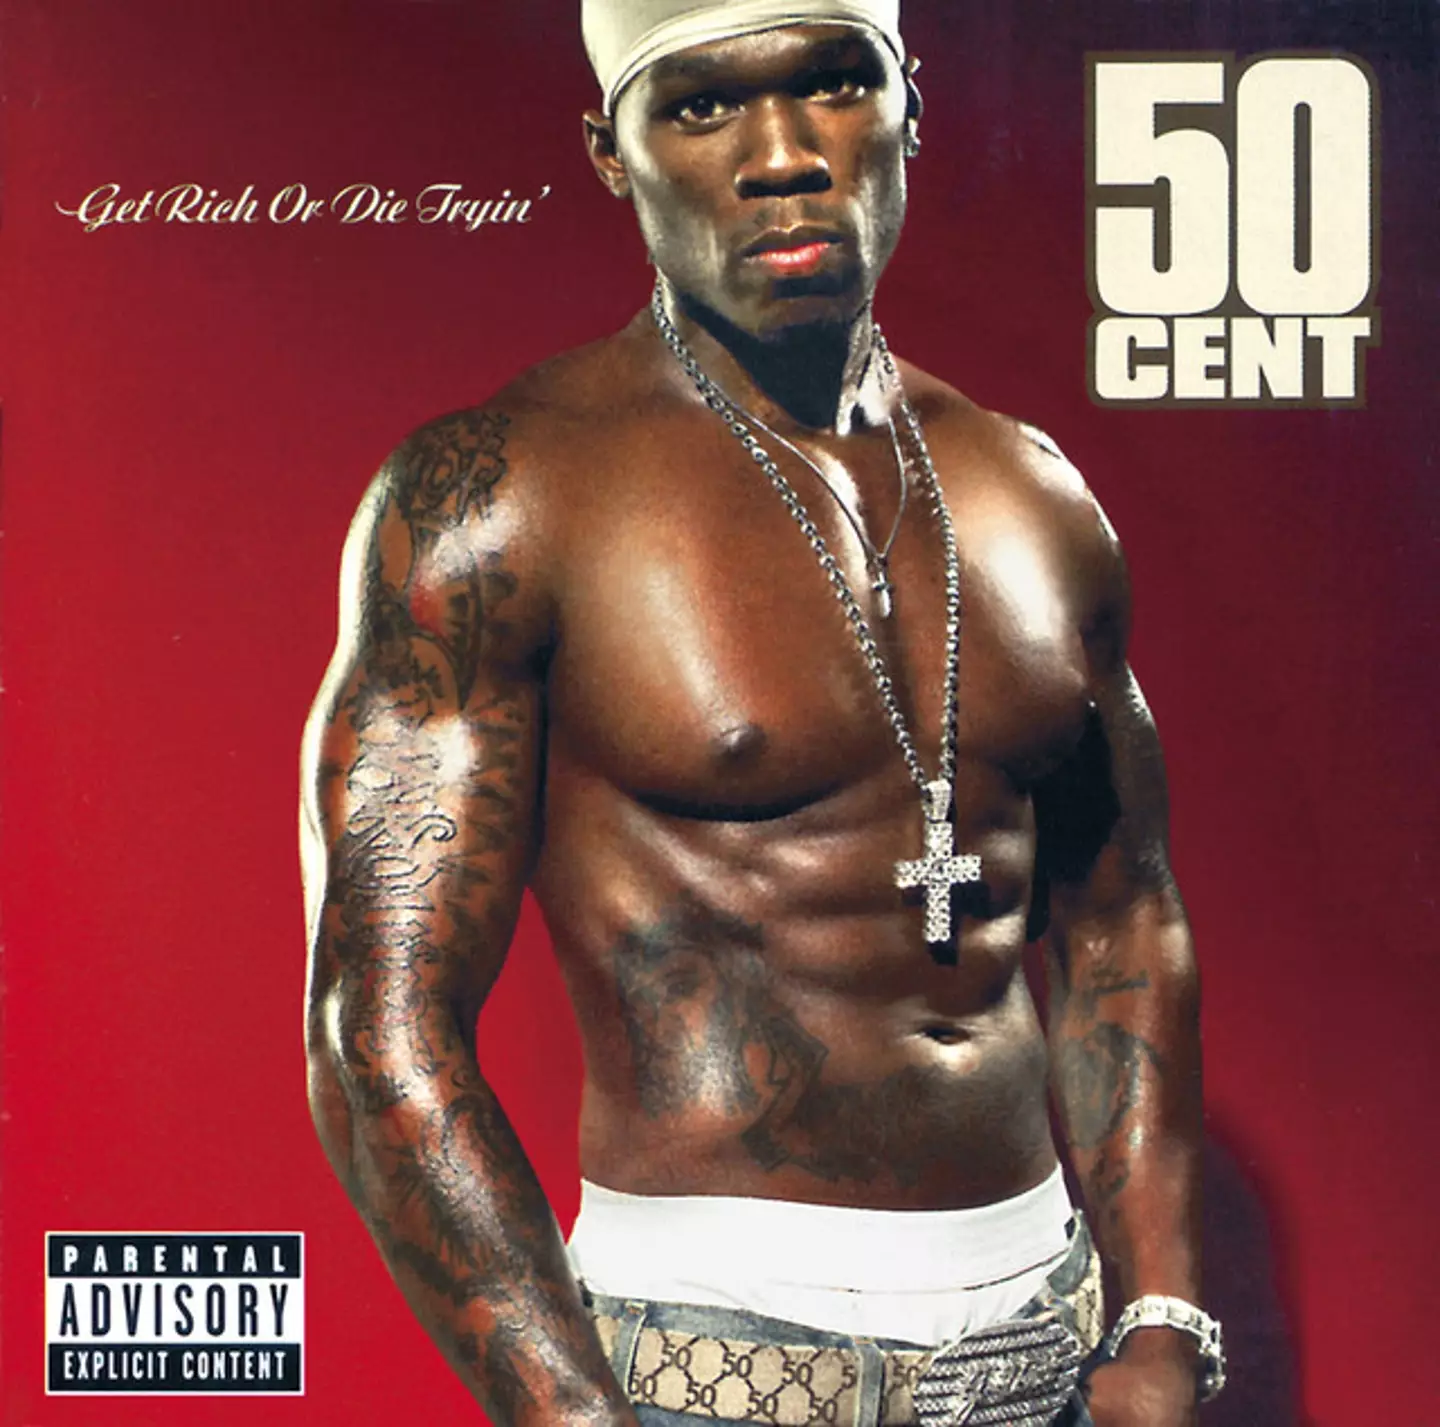 Cannon made reference to 50 Cent's iconic album cover.